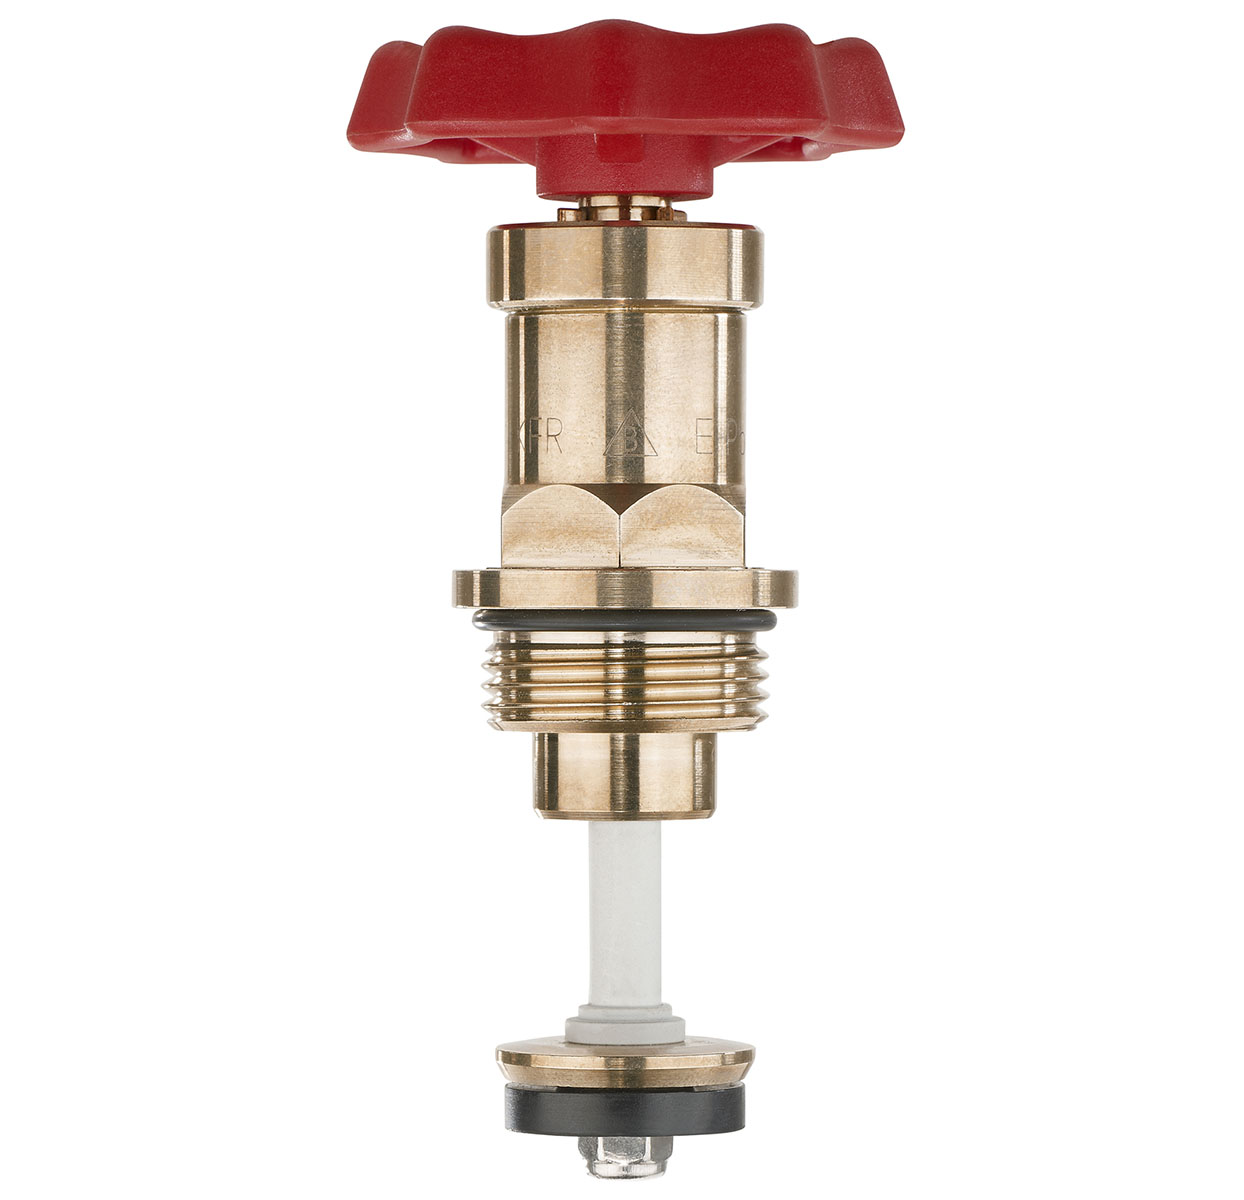 3215400 - Red-brass upper-part with grease chamber for Combined Free-flow and Backflow-preventer valves